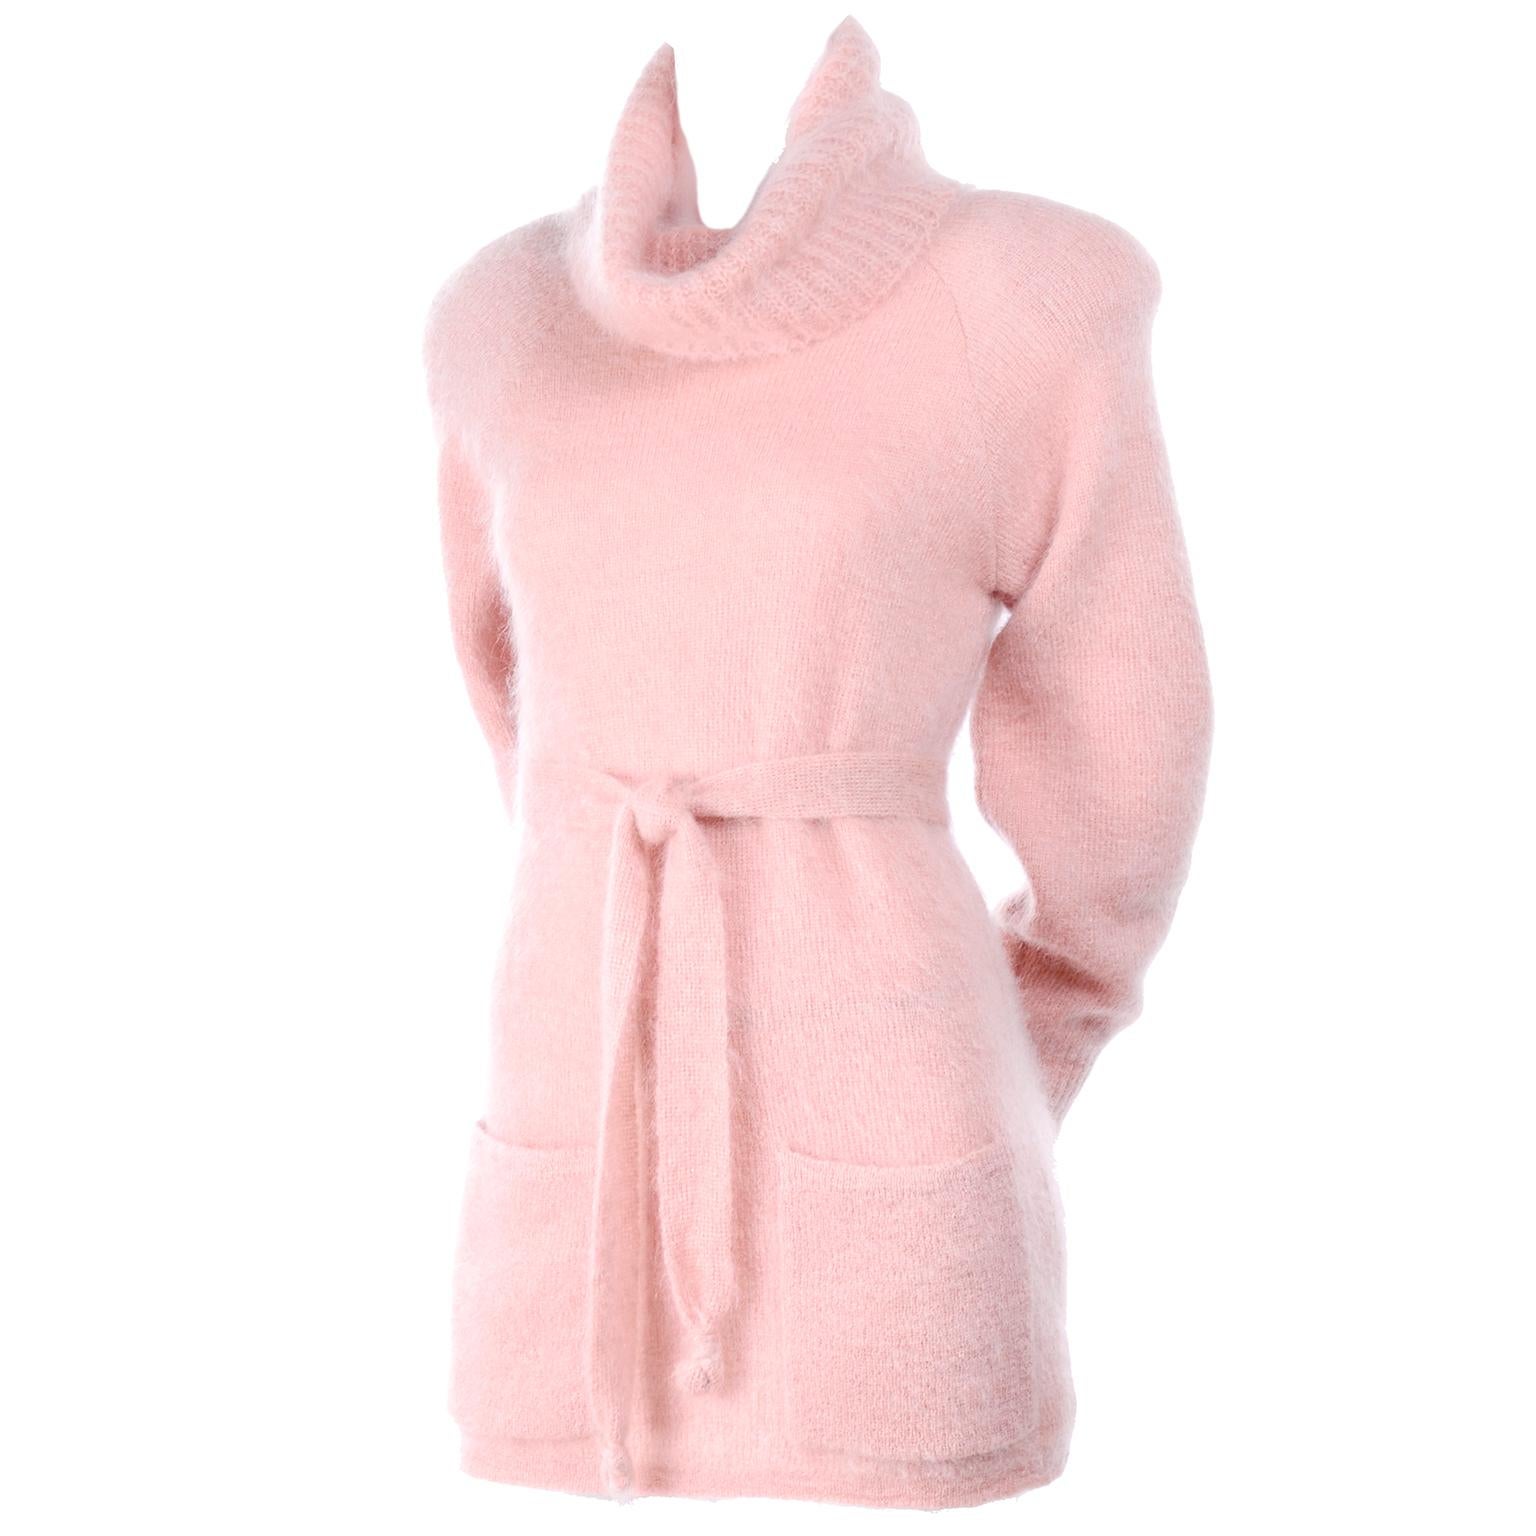 1970s Anne Klein Pink Mohair Cowl Neck Sweater With Pockets & Belt Made in Italy